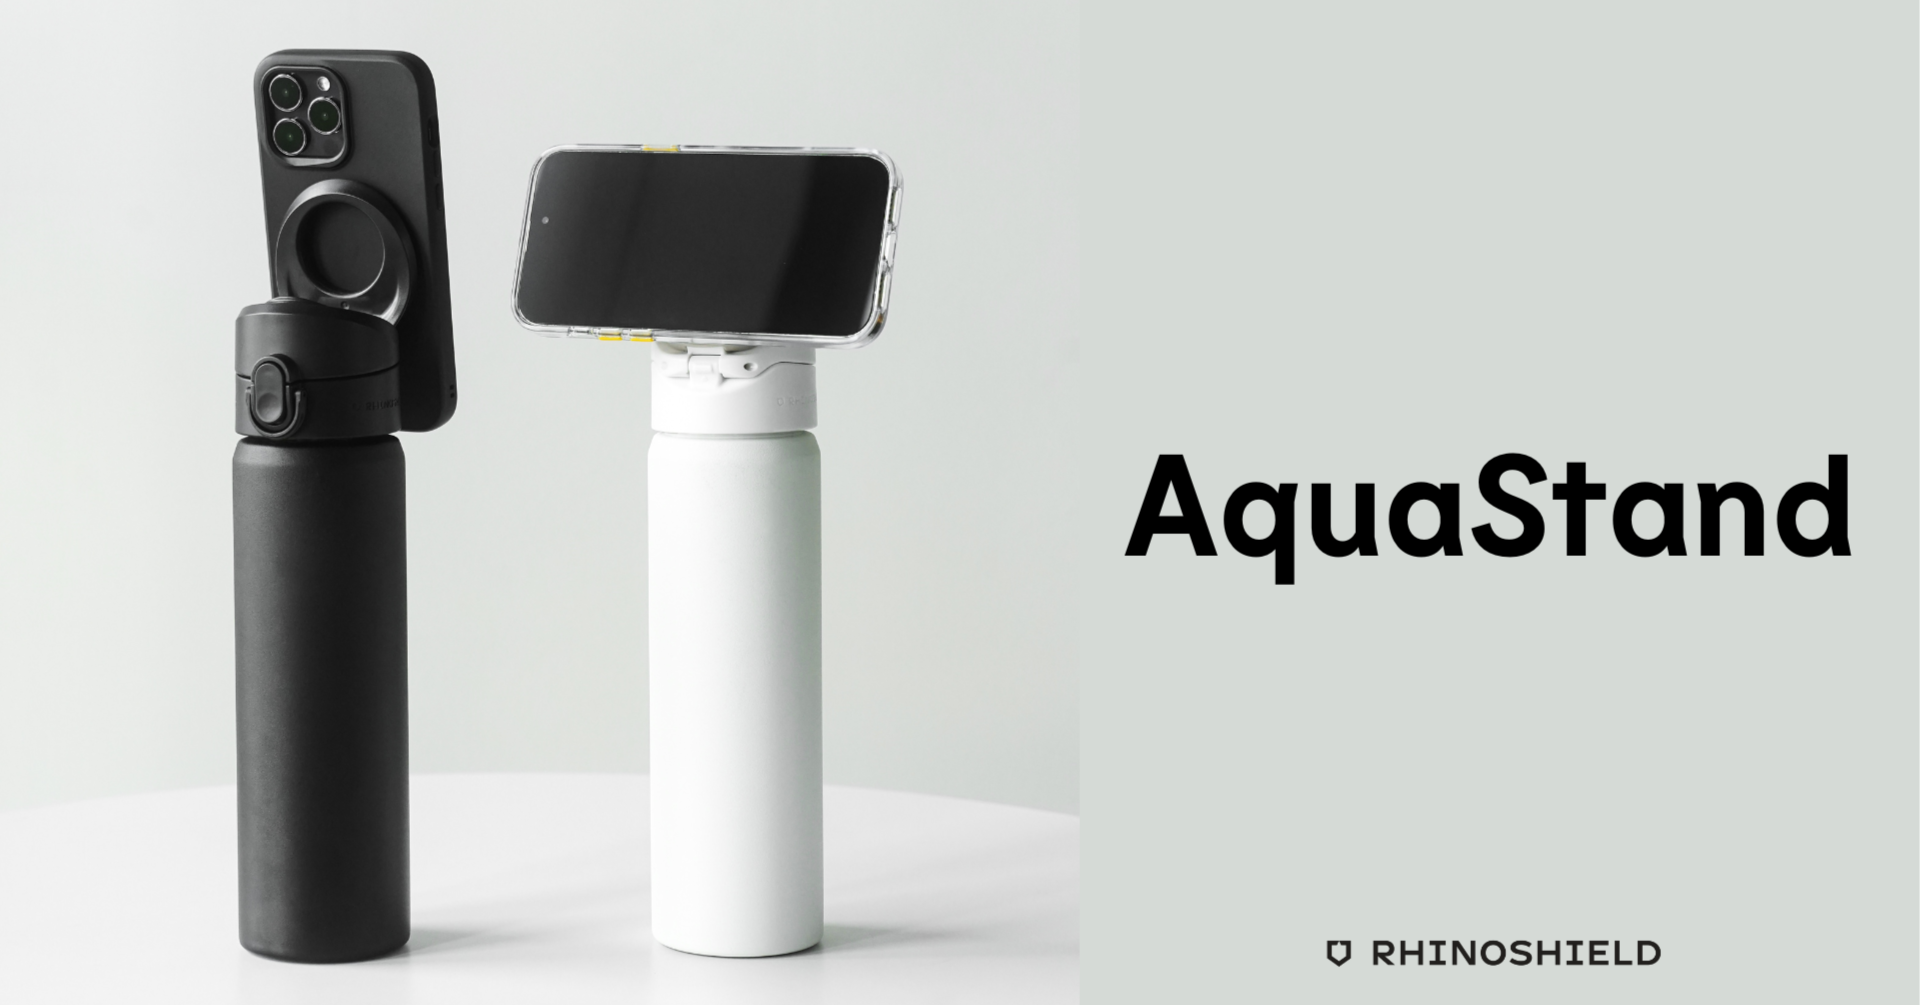 RHINOSHIELD AquaStand: Super Useful Hi Tech Water Bottle with Built in  MagSafe Stand / Tripod! 